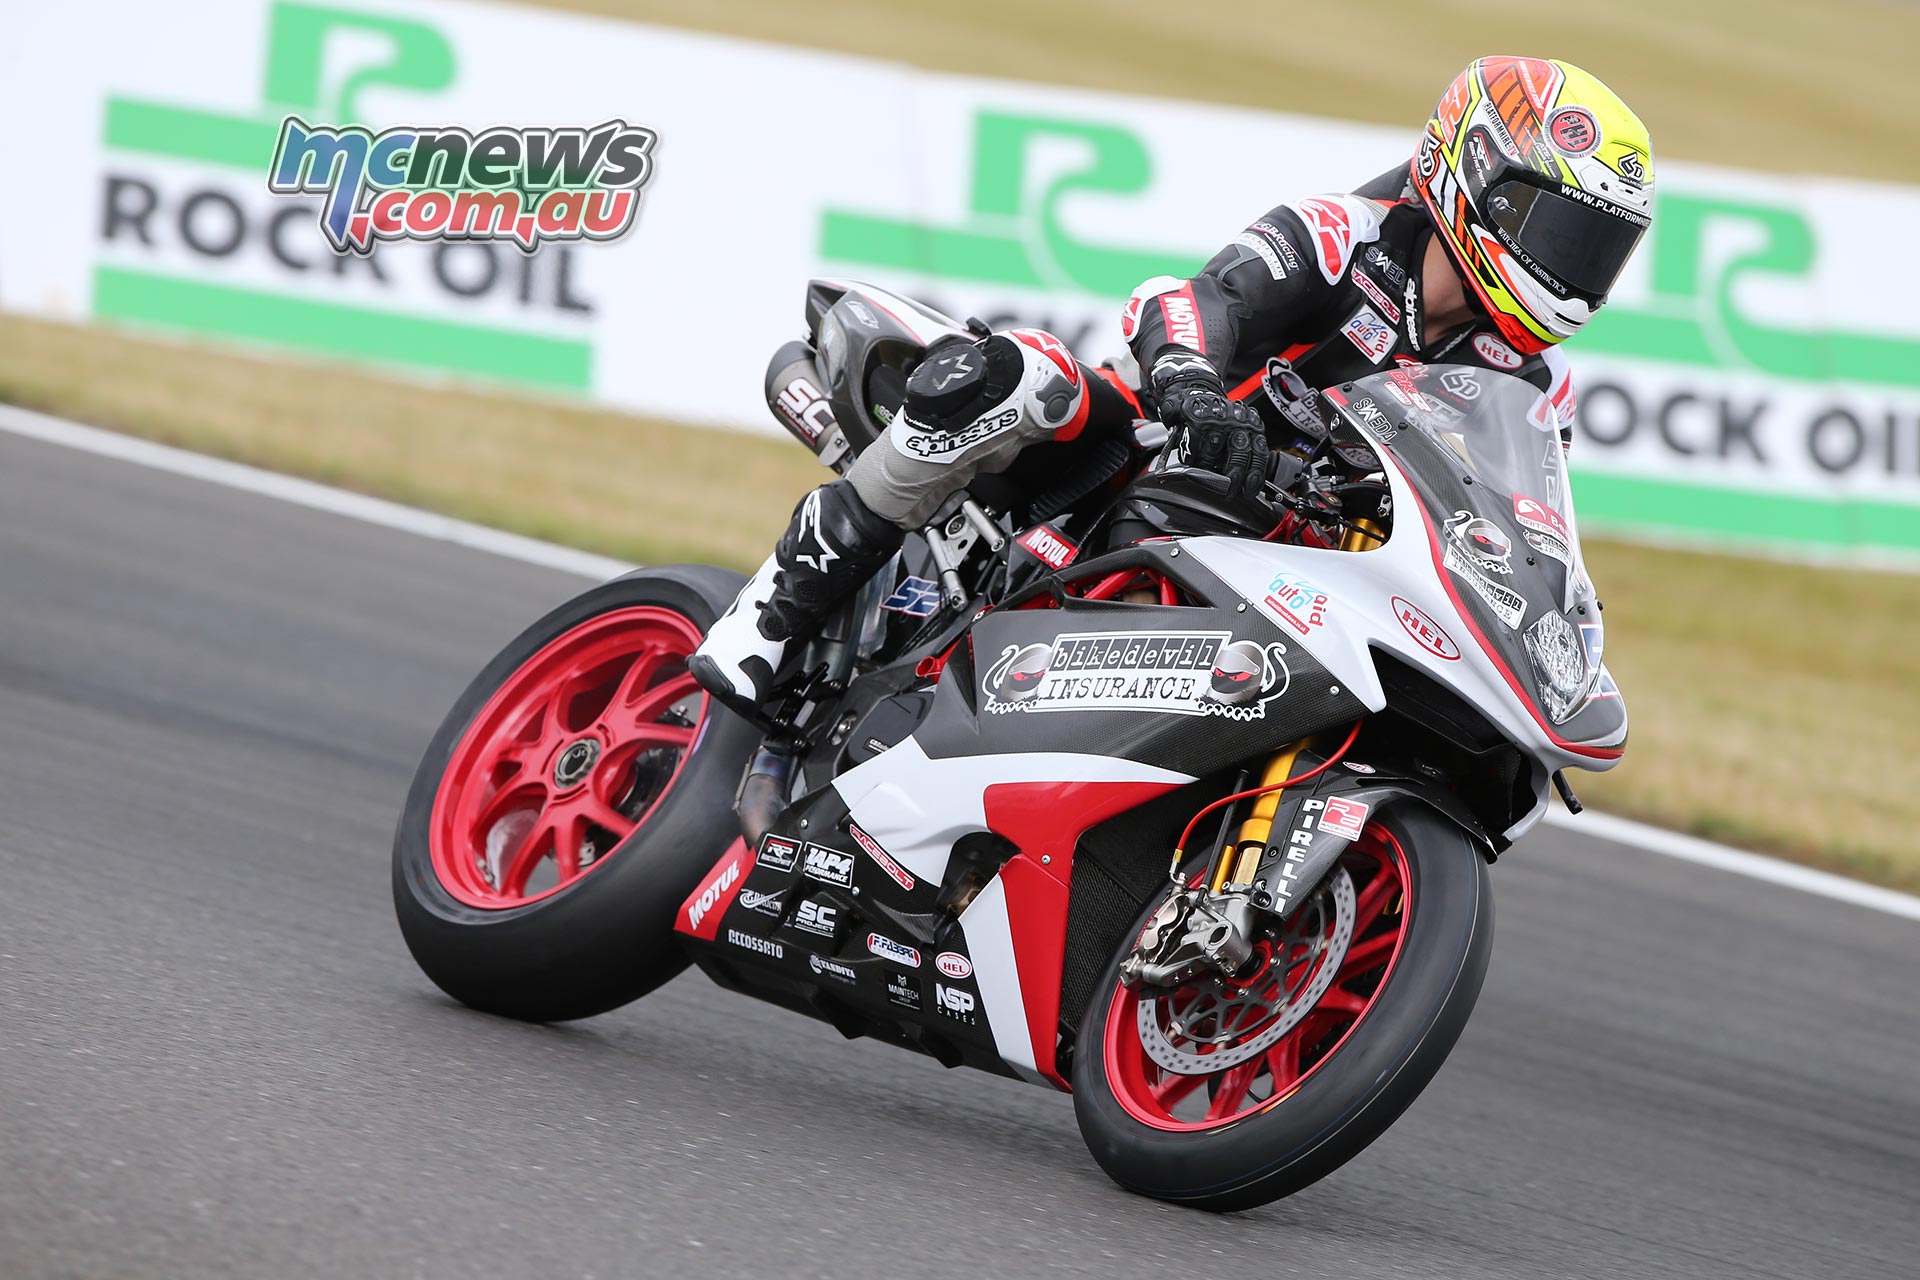 Snetterton Bsb Image Overload Part Two Motorcycle News